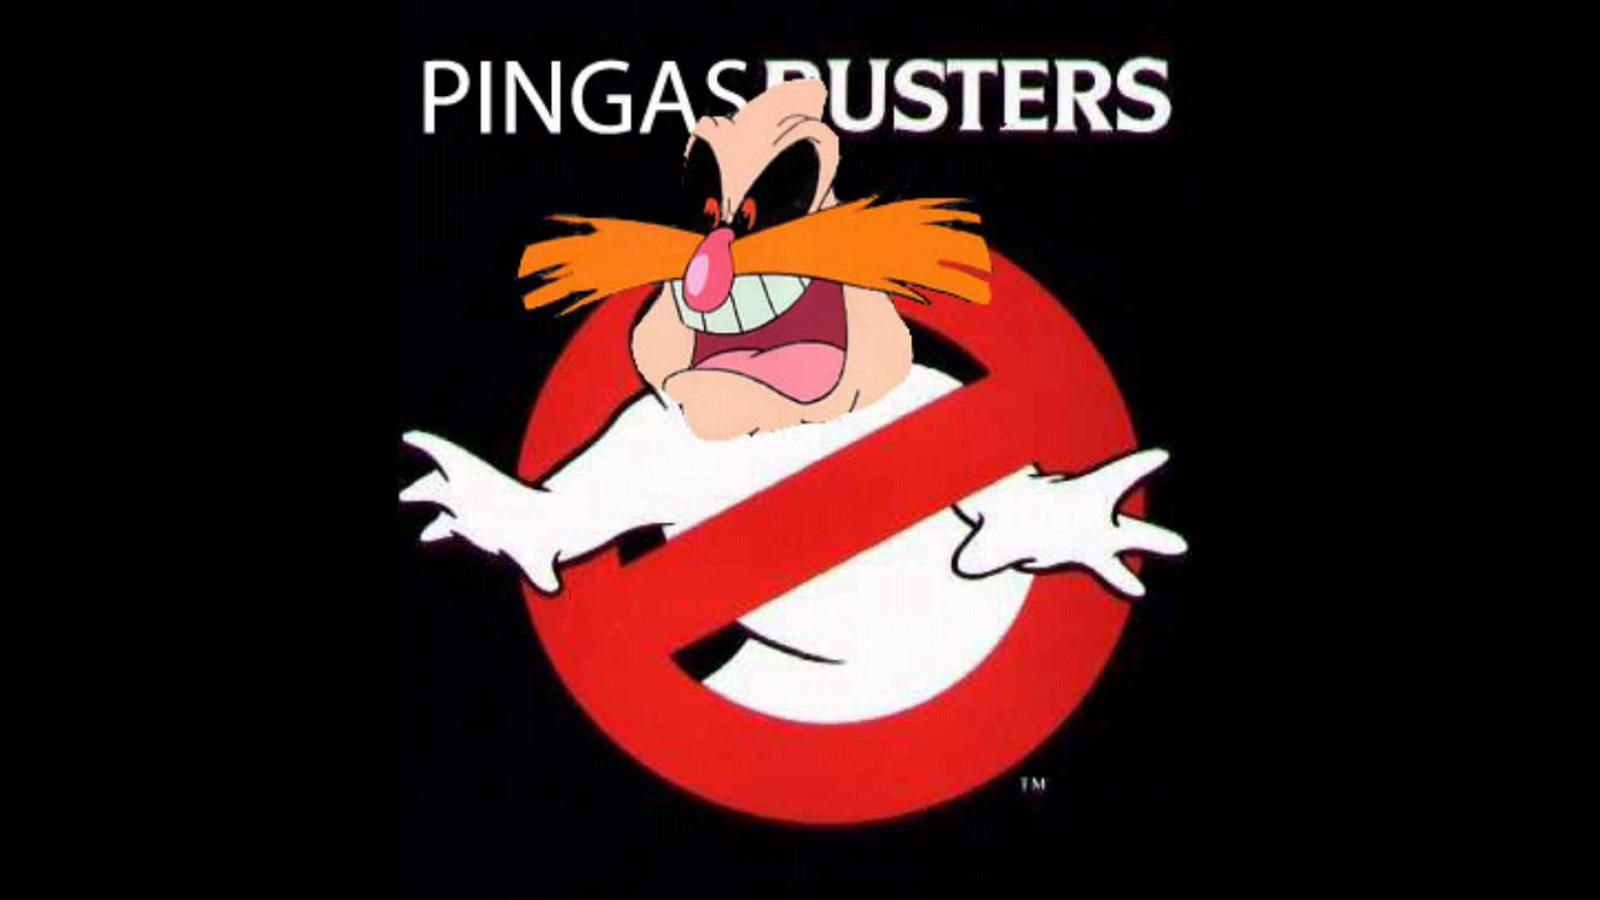 PINGASBUSTERS!